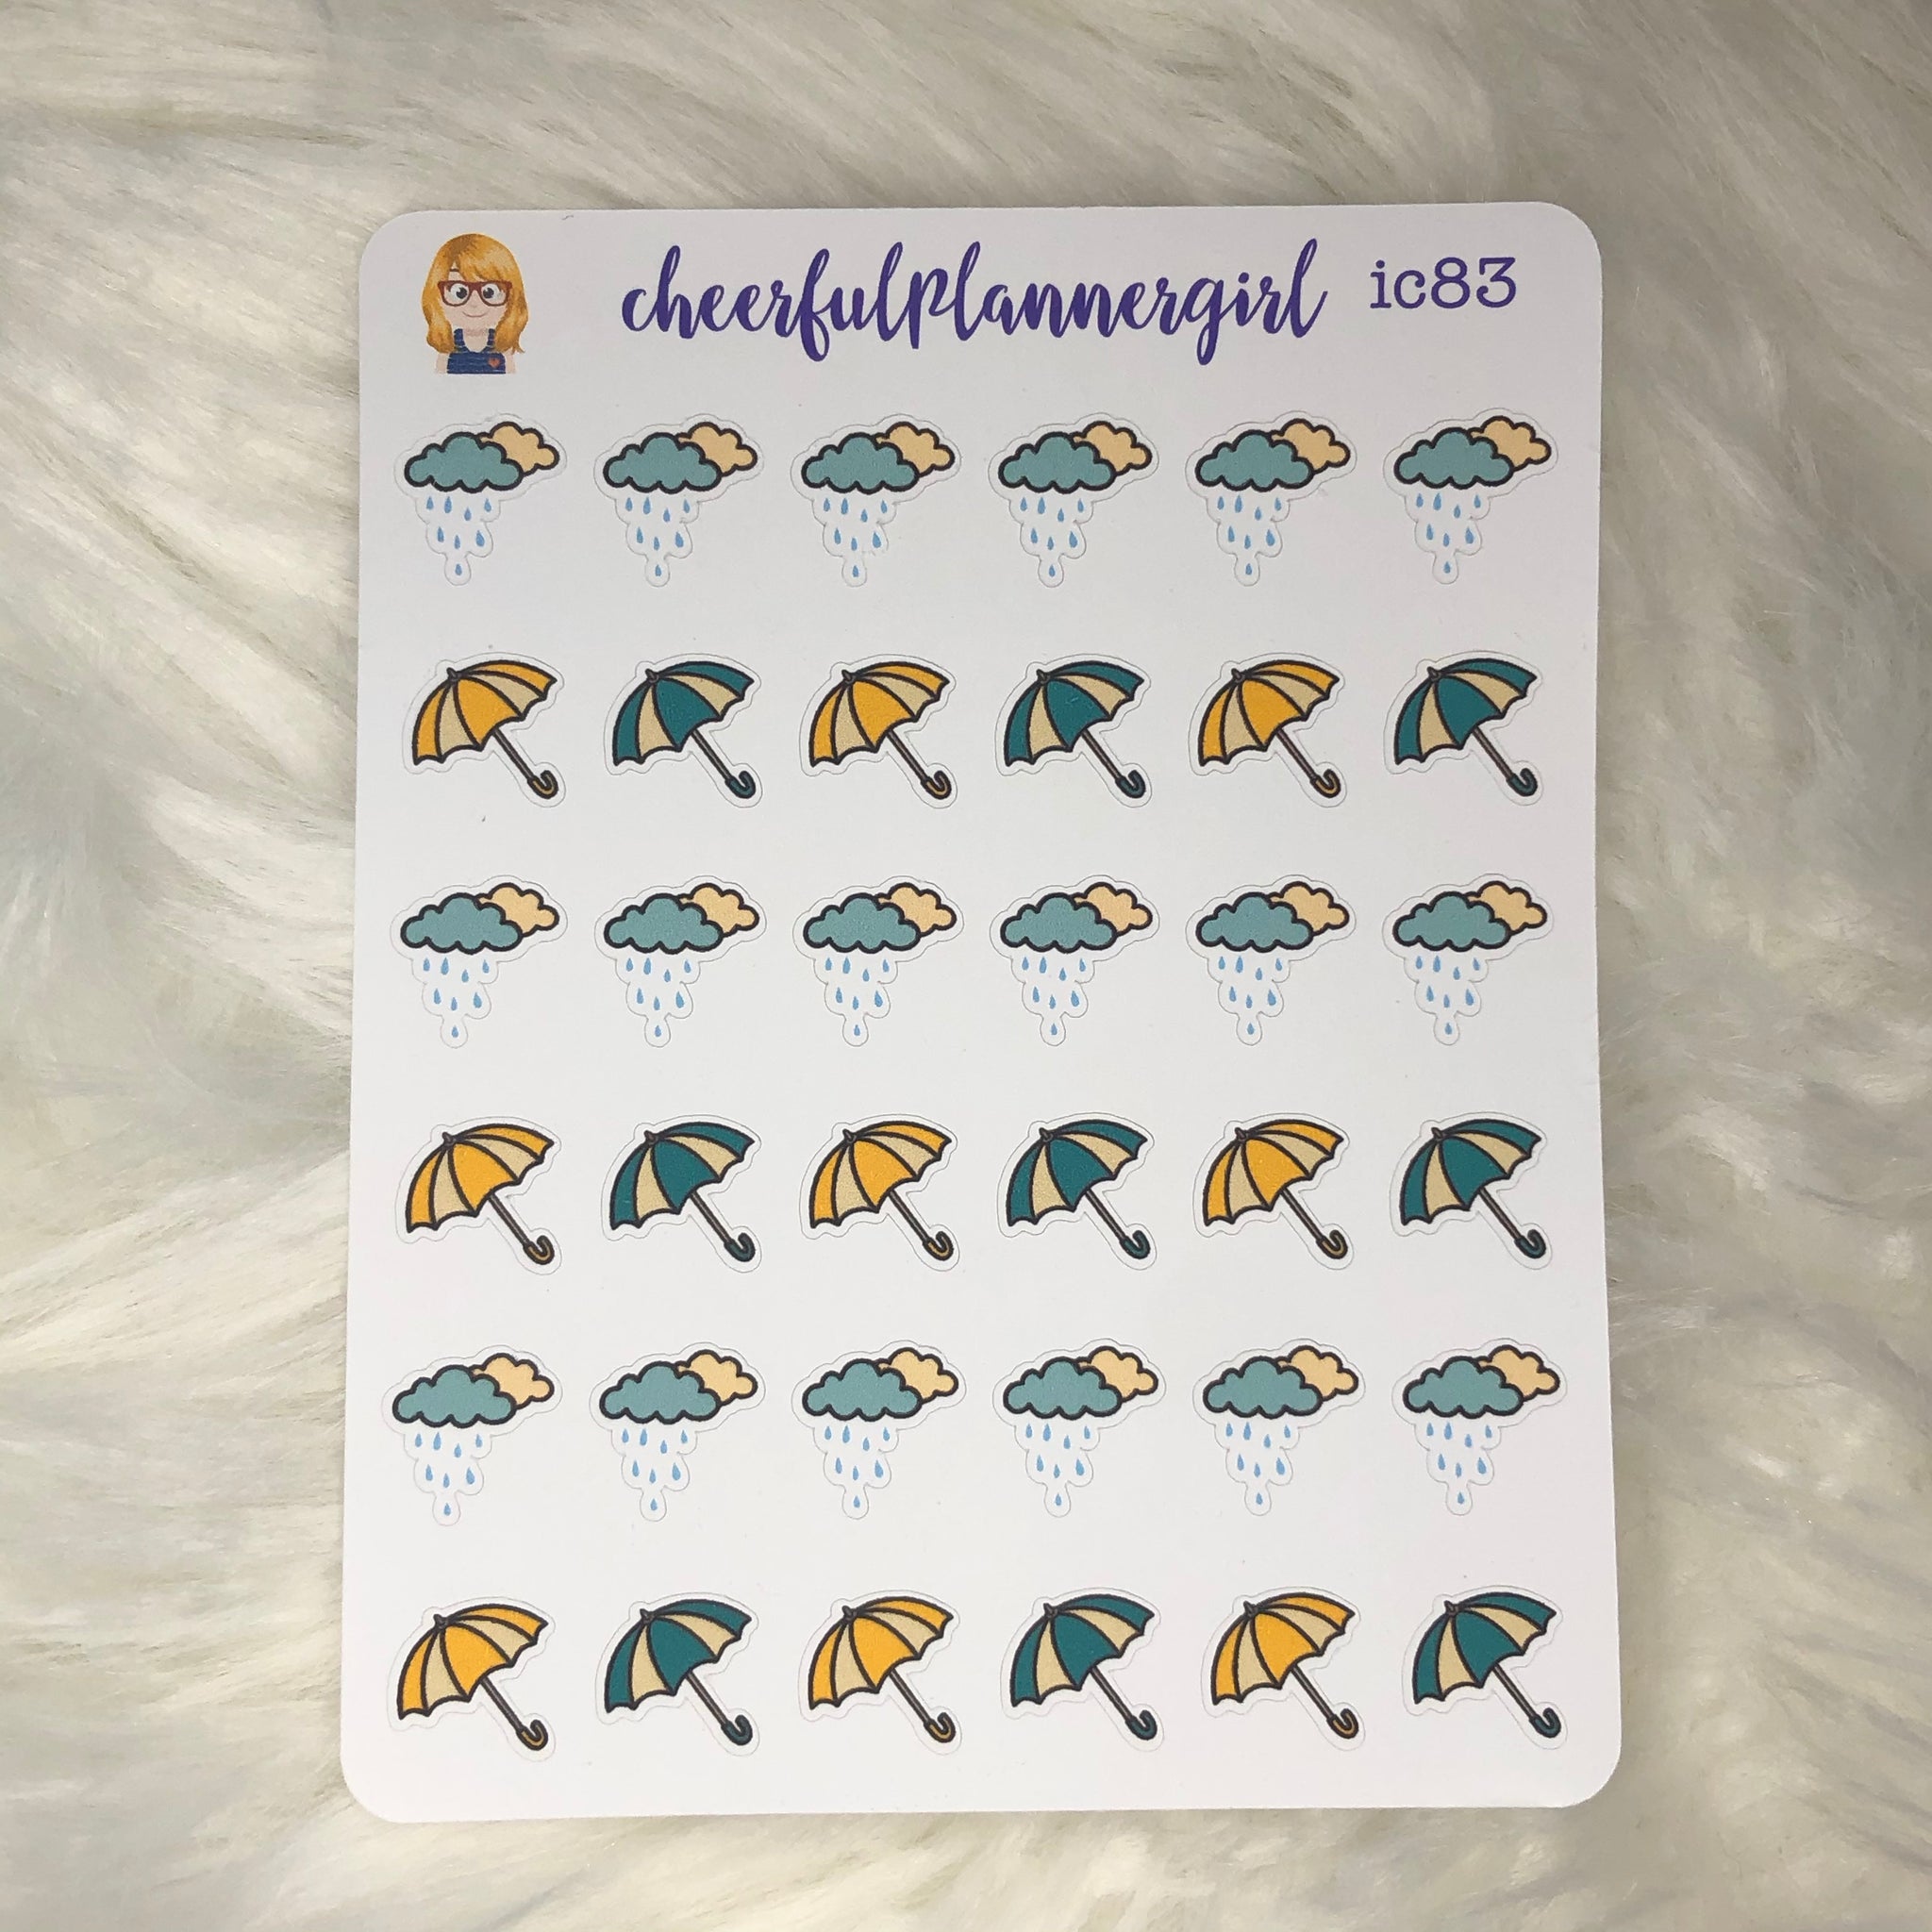 Autumn Rain Planner Stickers Fall Umbrellas and Clouds with Rain